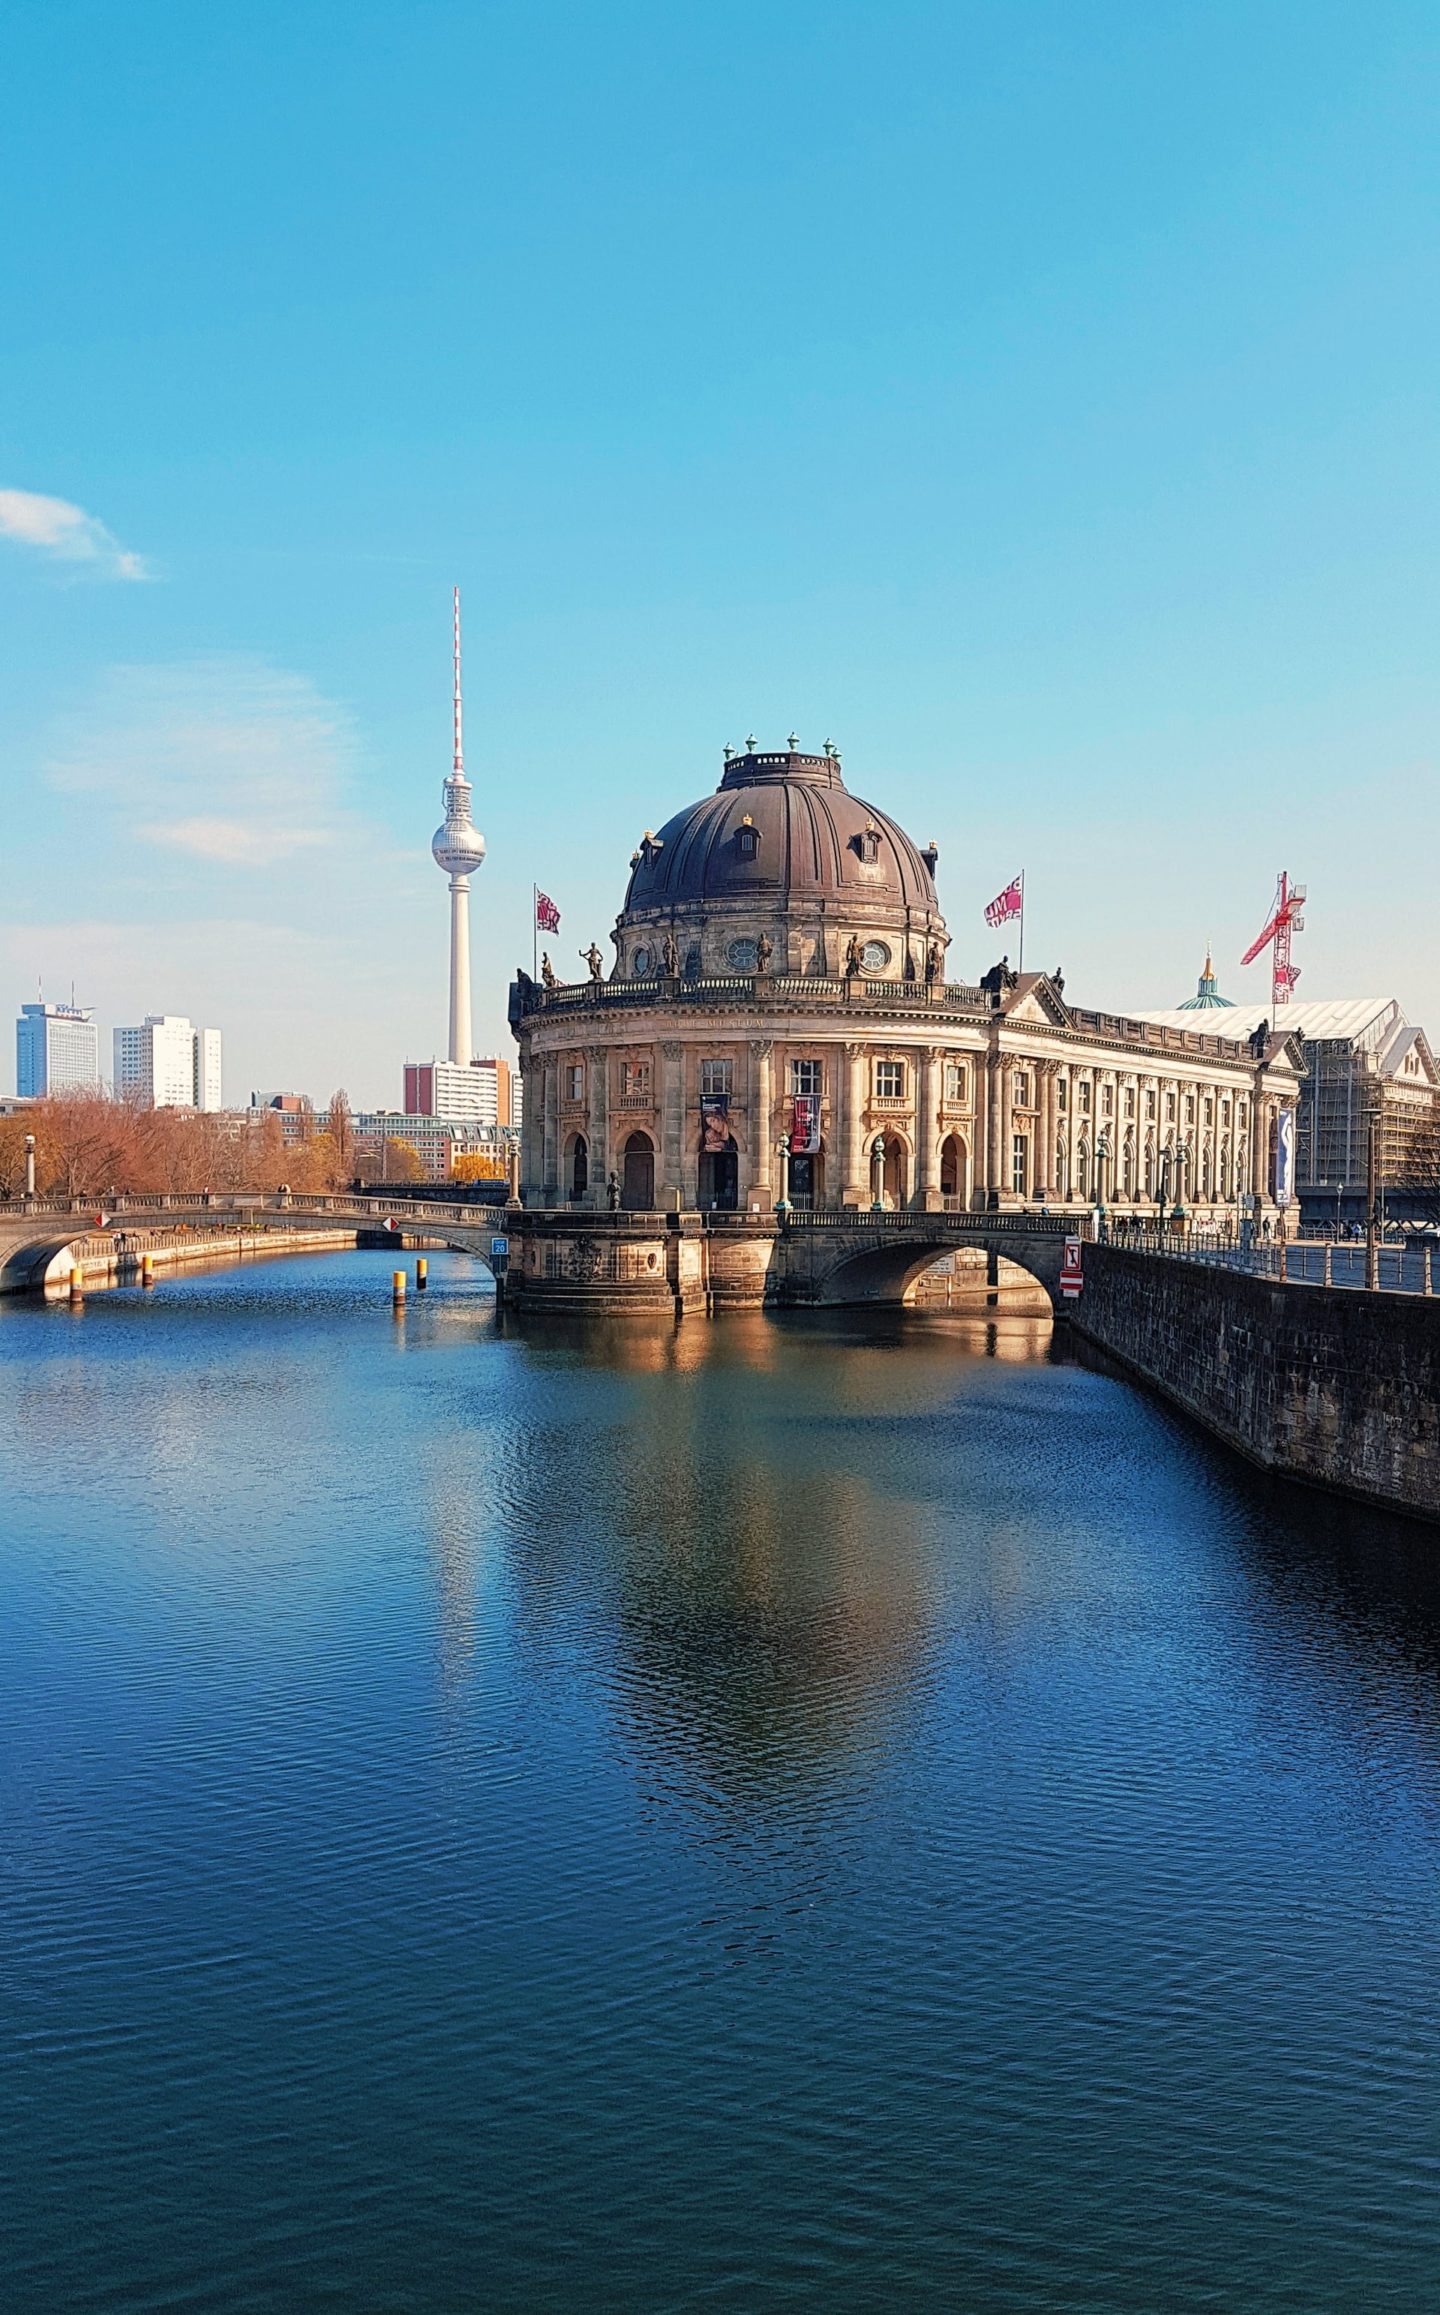 Museums and architecture - the best things to see in berlin